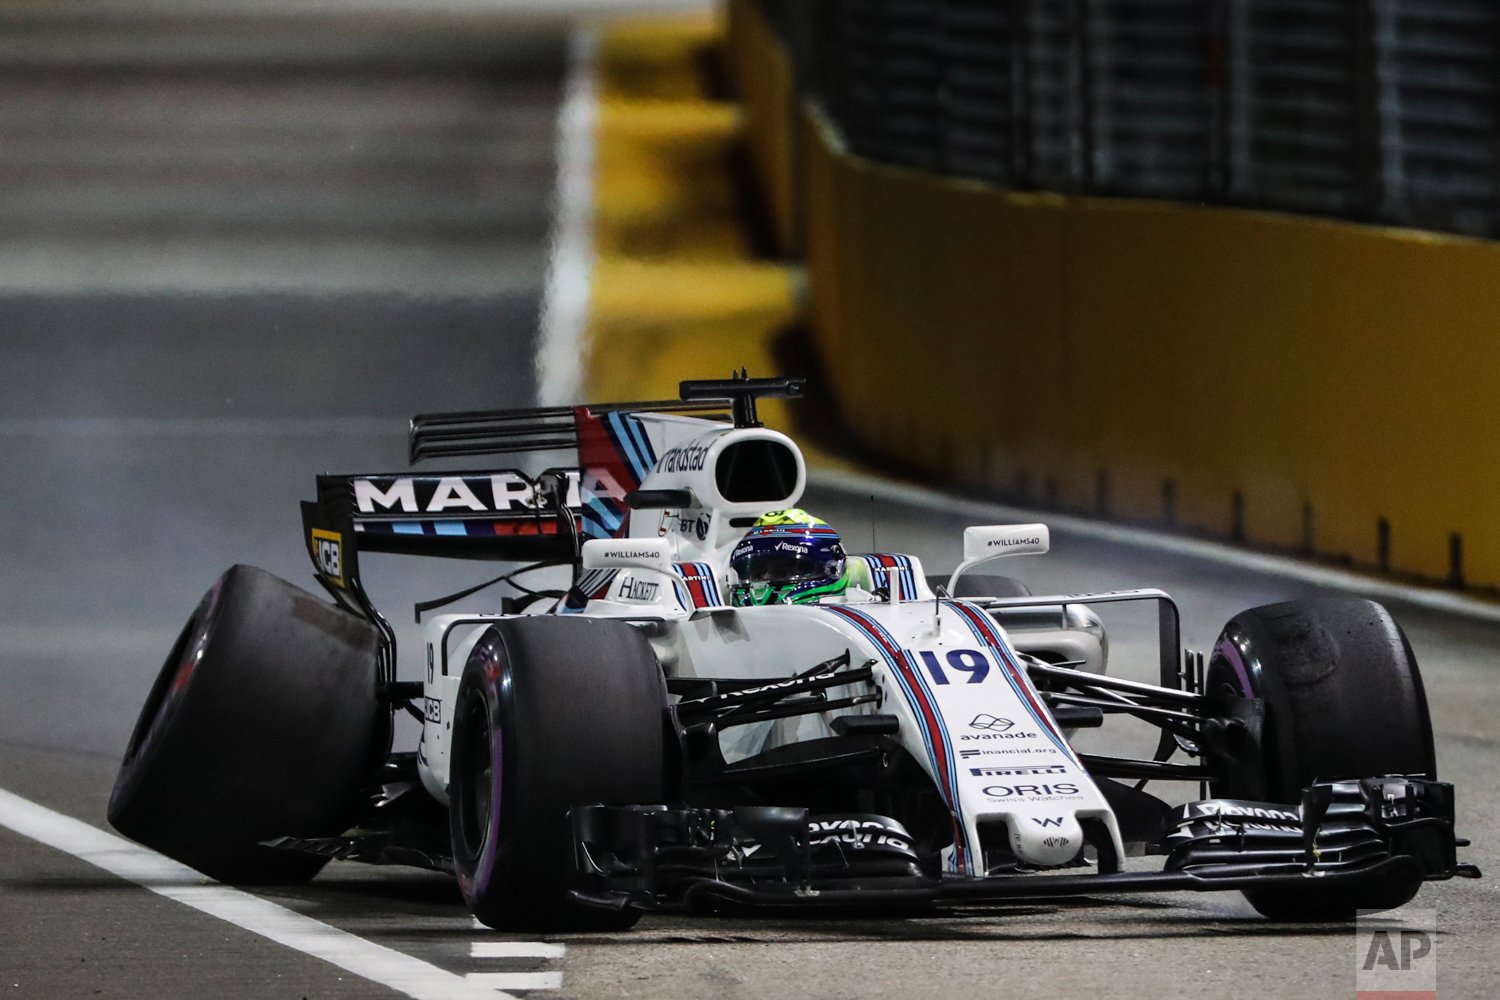  Williams driver Felipe Massa of Brazil steers his car with the rear wheel damaged after hitting the wall during the qualifying session for the Singapore Formula One Grand Prix on the Marina Bay City Circuit Singapore, Saturday, Sept. 16, 2017. (AP P